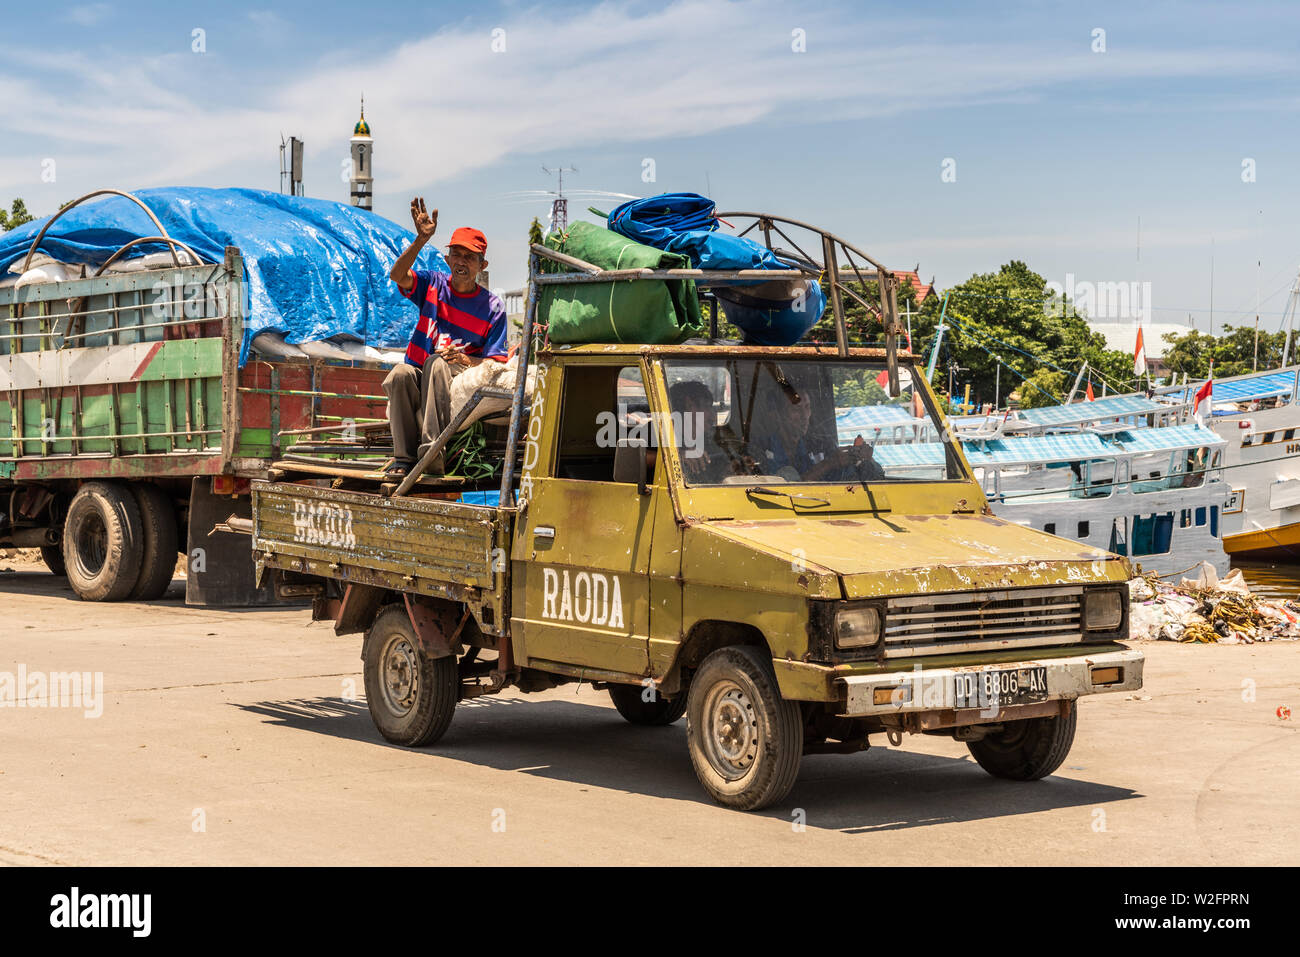 Makassar, Sulawesi, Indonesia - February 28, 2019: Paotere Old Port. Closeup of old damaged pickup truck with men, tarps and other stuff riding at the Stock Photo